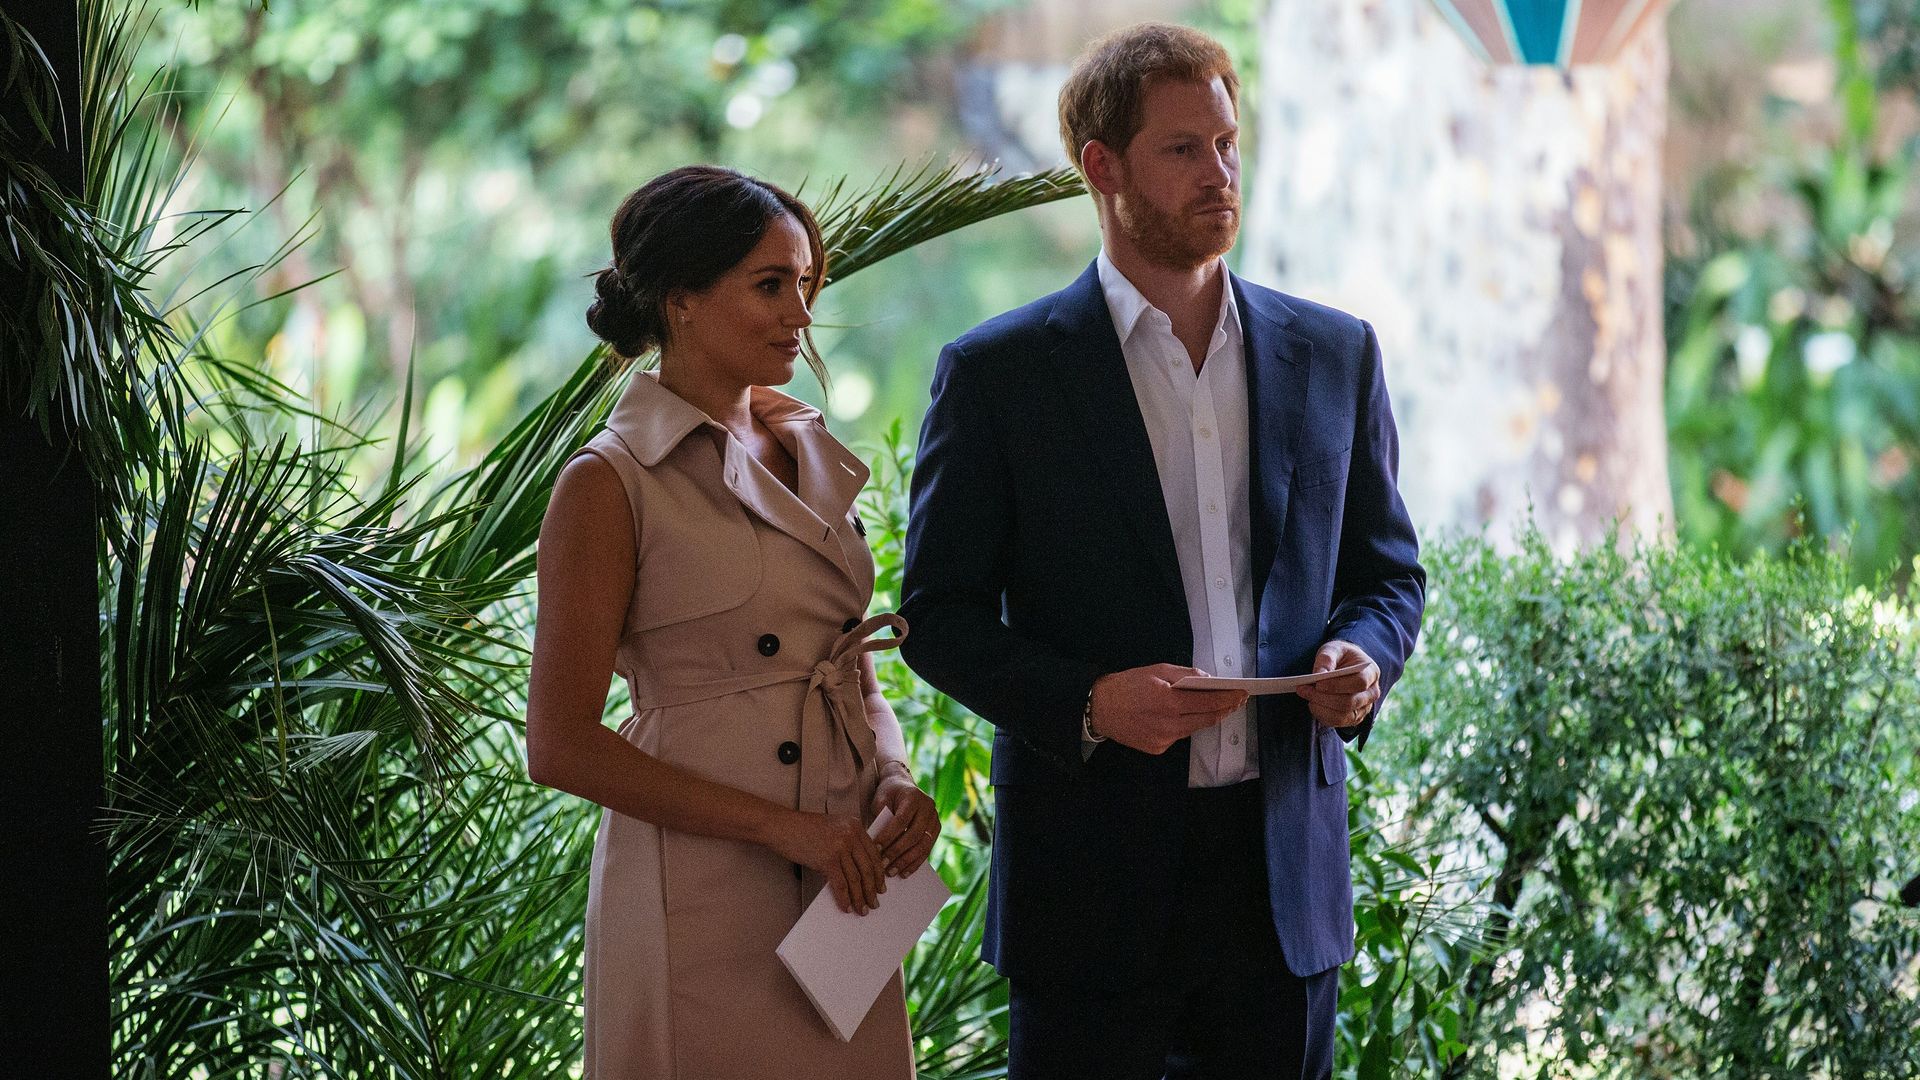 In this image, Prince Harry and Meghan Markle stand 